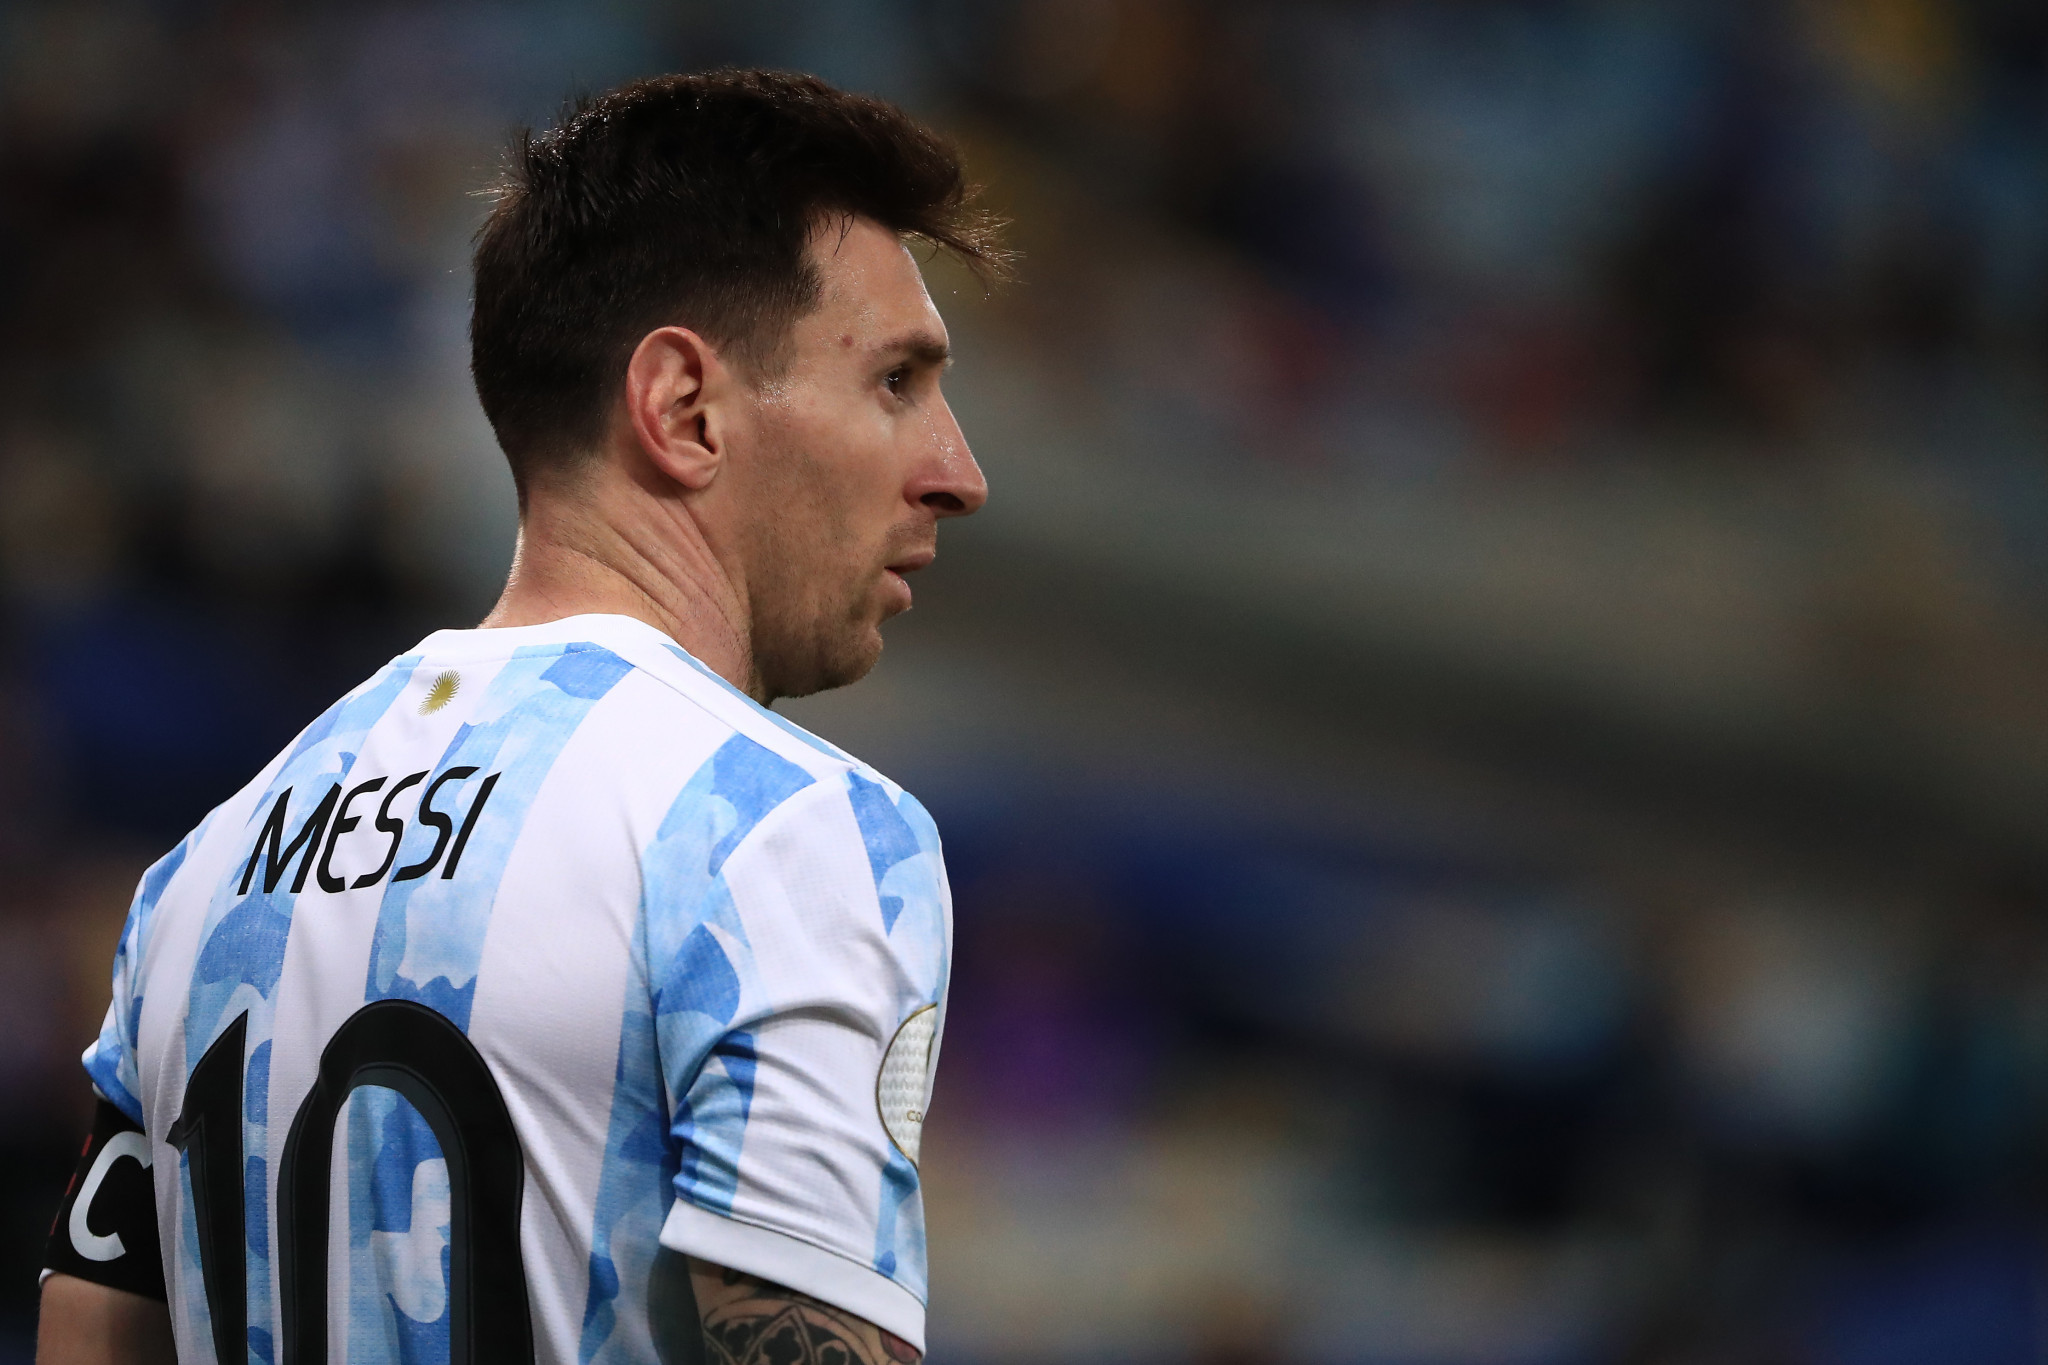 Paris Saint-Germain's new signing Lionel Messi could miss Argentina's FIFA World Cup qualifying matches next month because his club may refuse to release him ©Getty Images